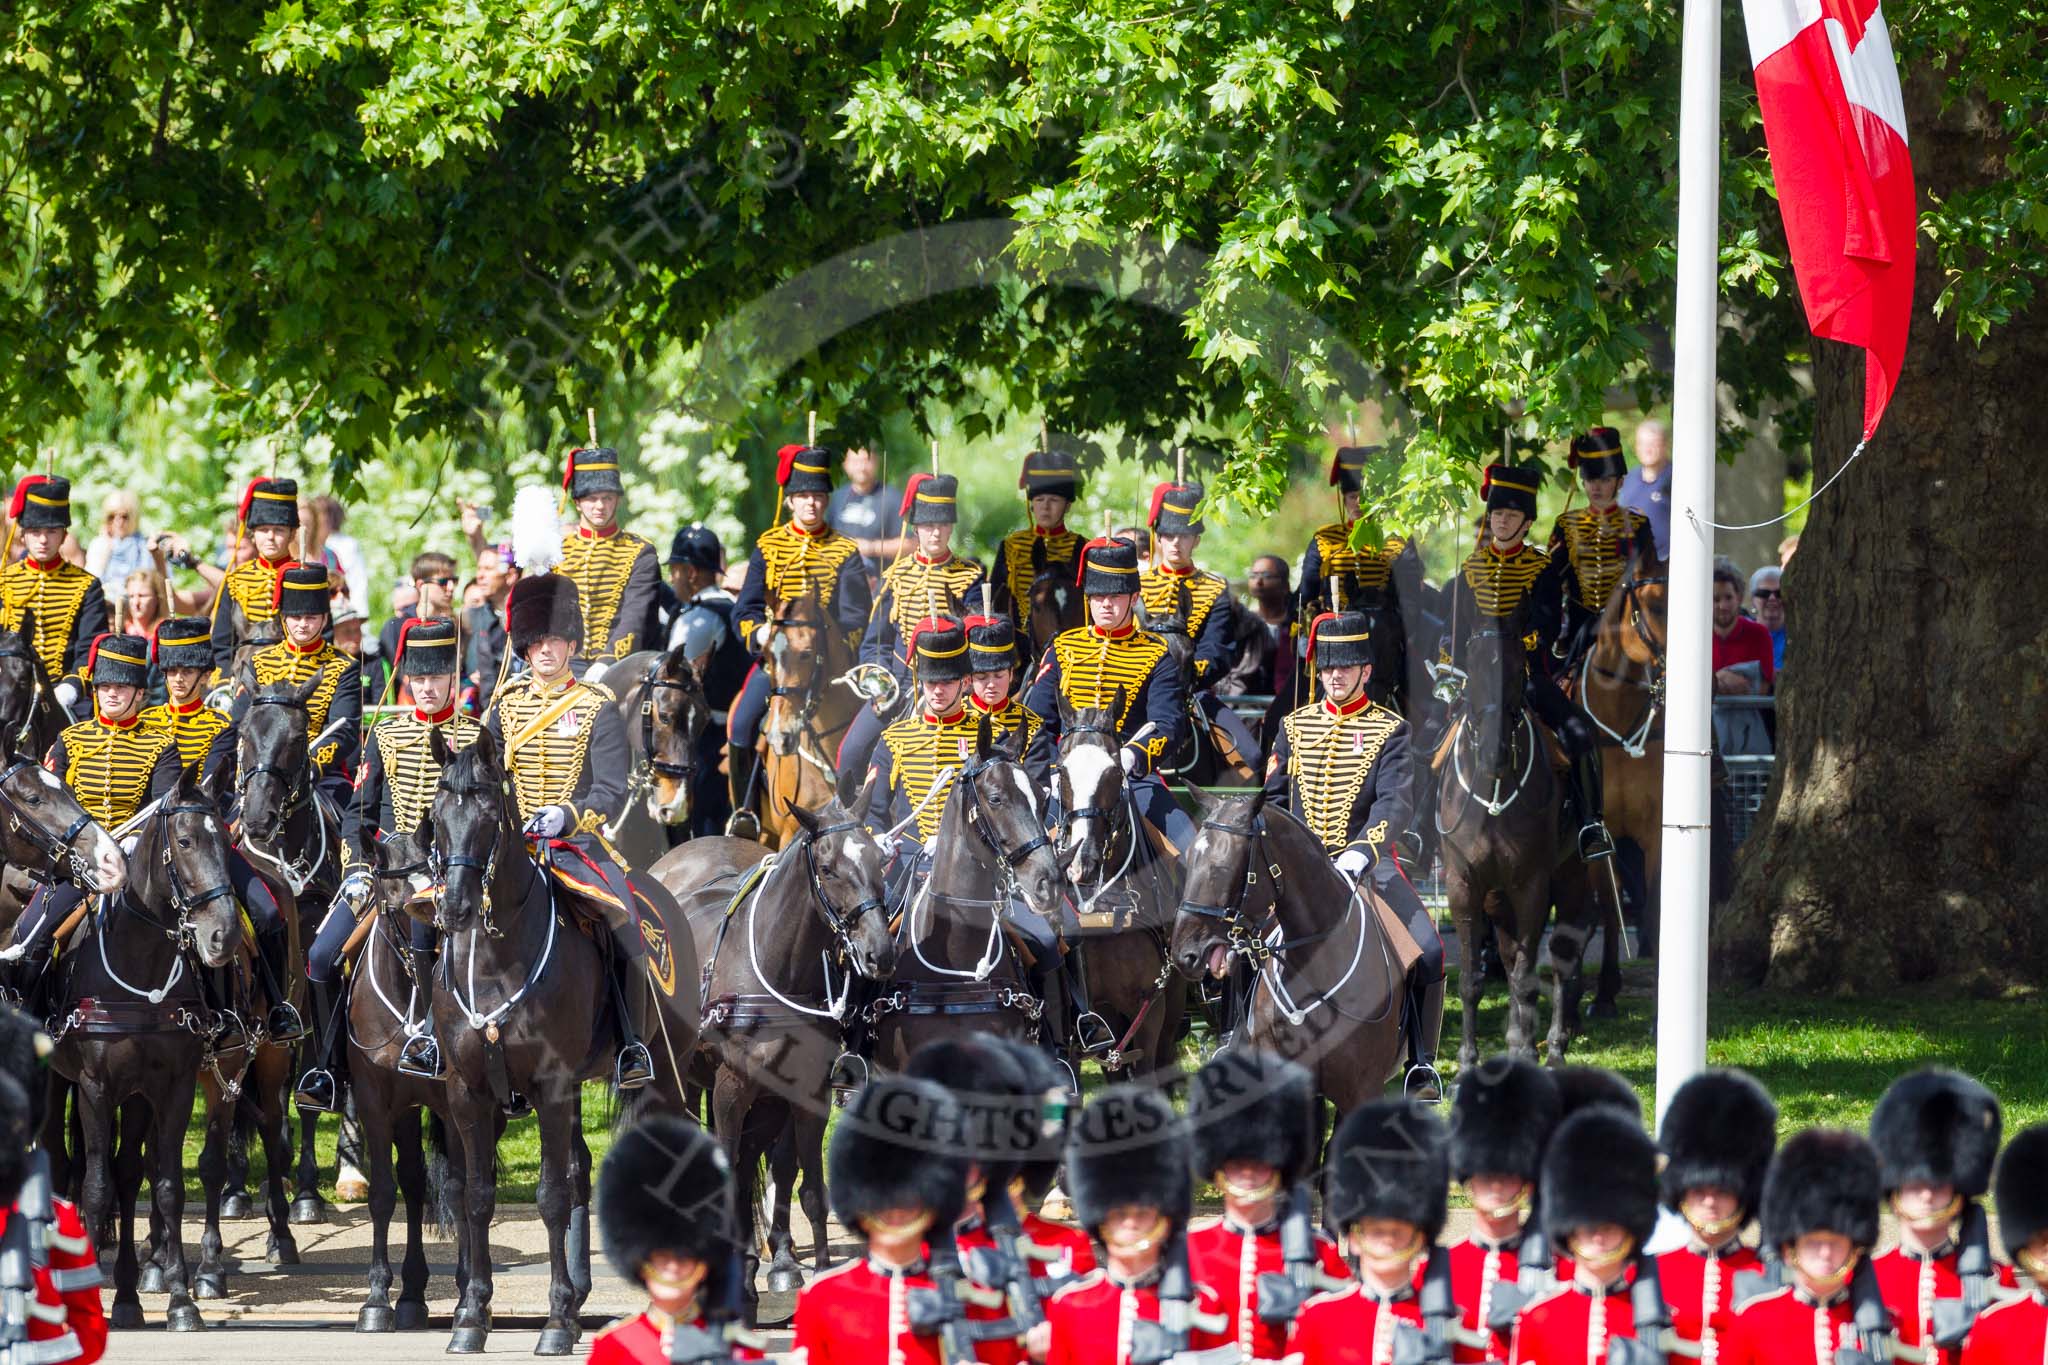 The Colonel's Review 2015.
Horse Guards Parade, Westminster,
London,

United Kingdom,
on 06 June 2015 at 10:38, image #123